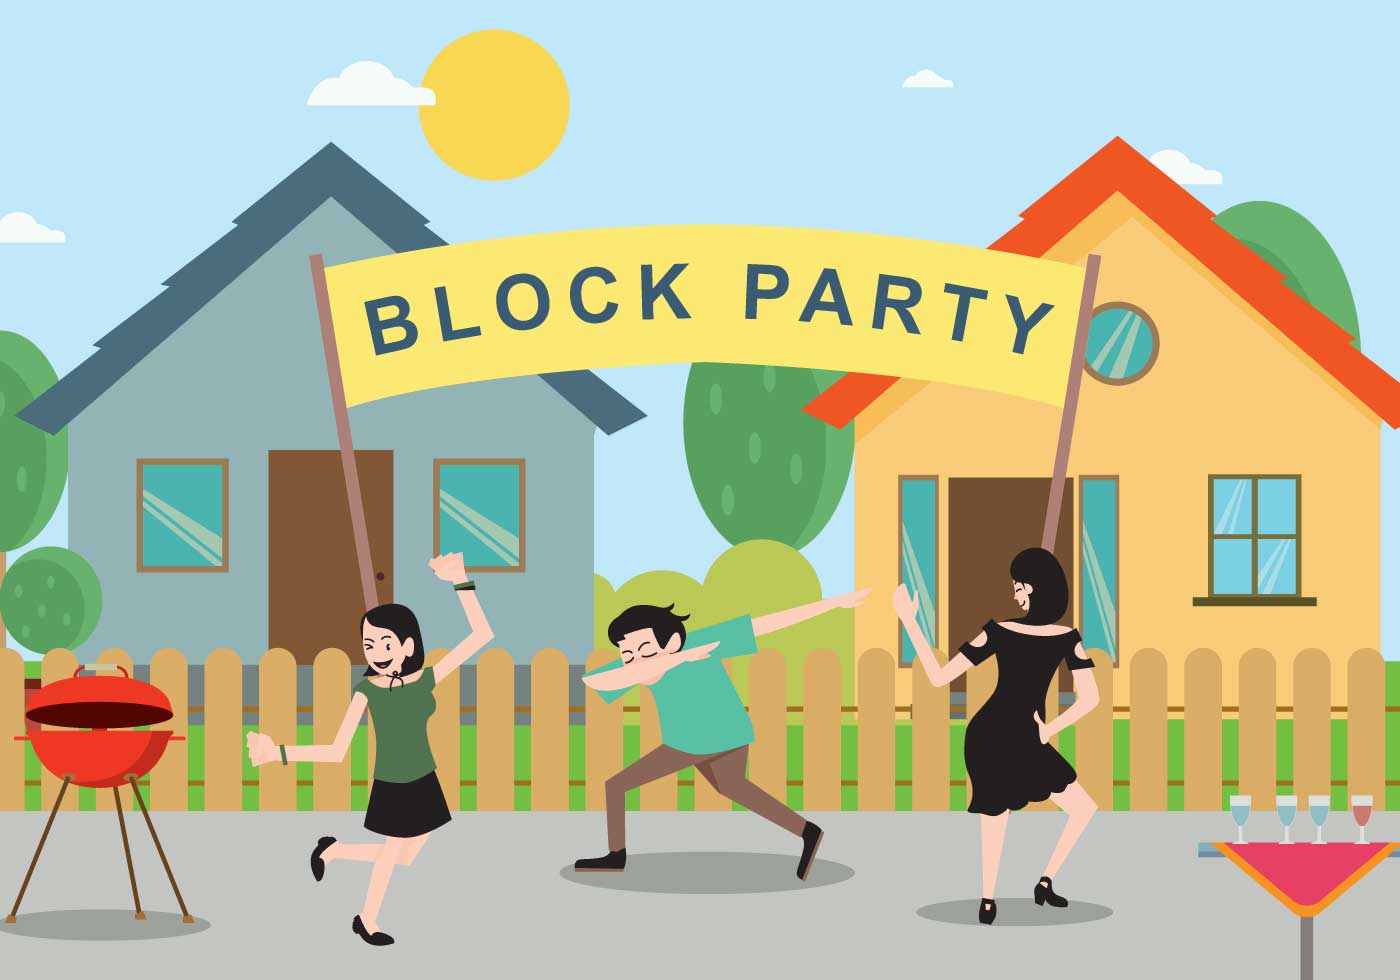 Download the Free Block Party Illustration 148698